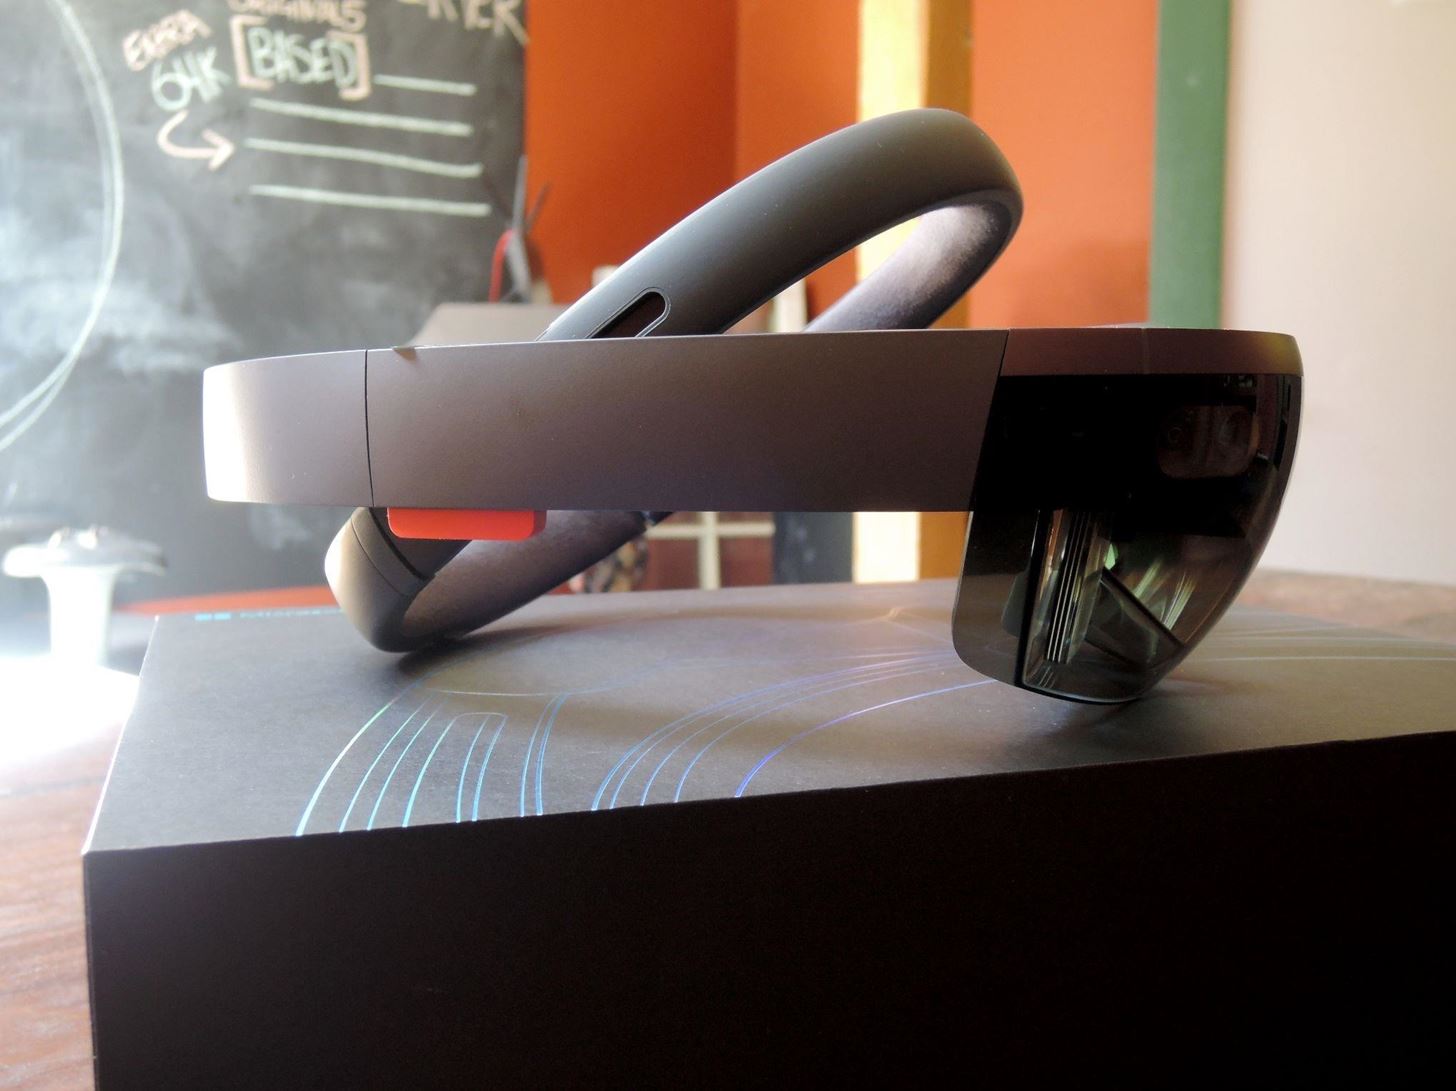 Your First Look at the HoloLens Development Edition